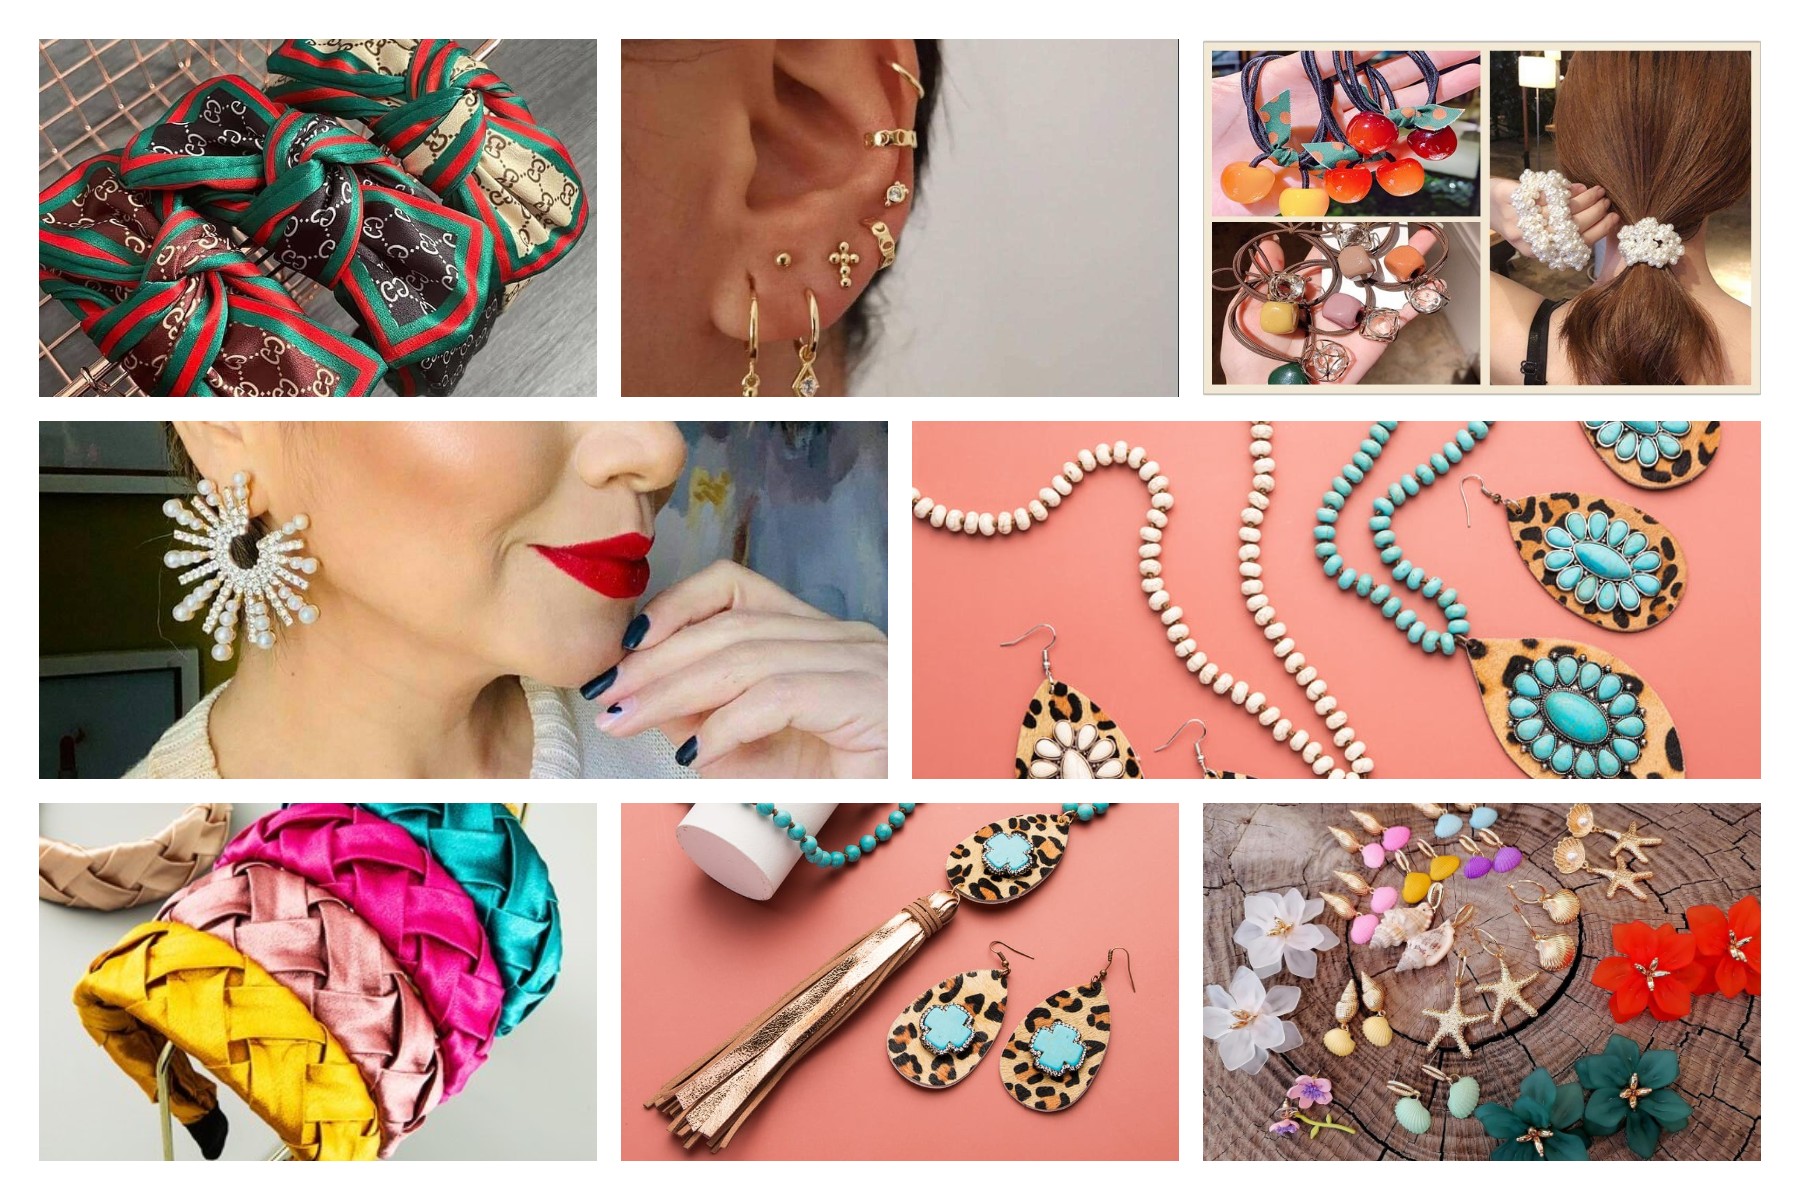 Top Wholesale Jewelry Supplier and Manufacture in the World